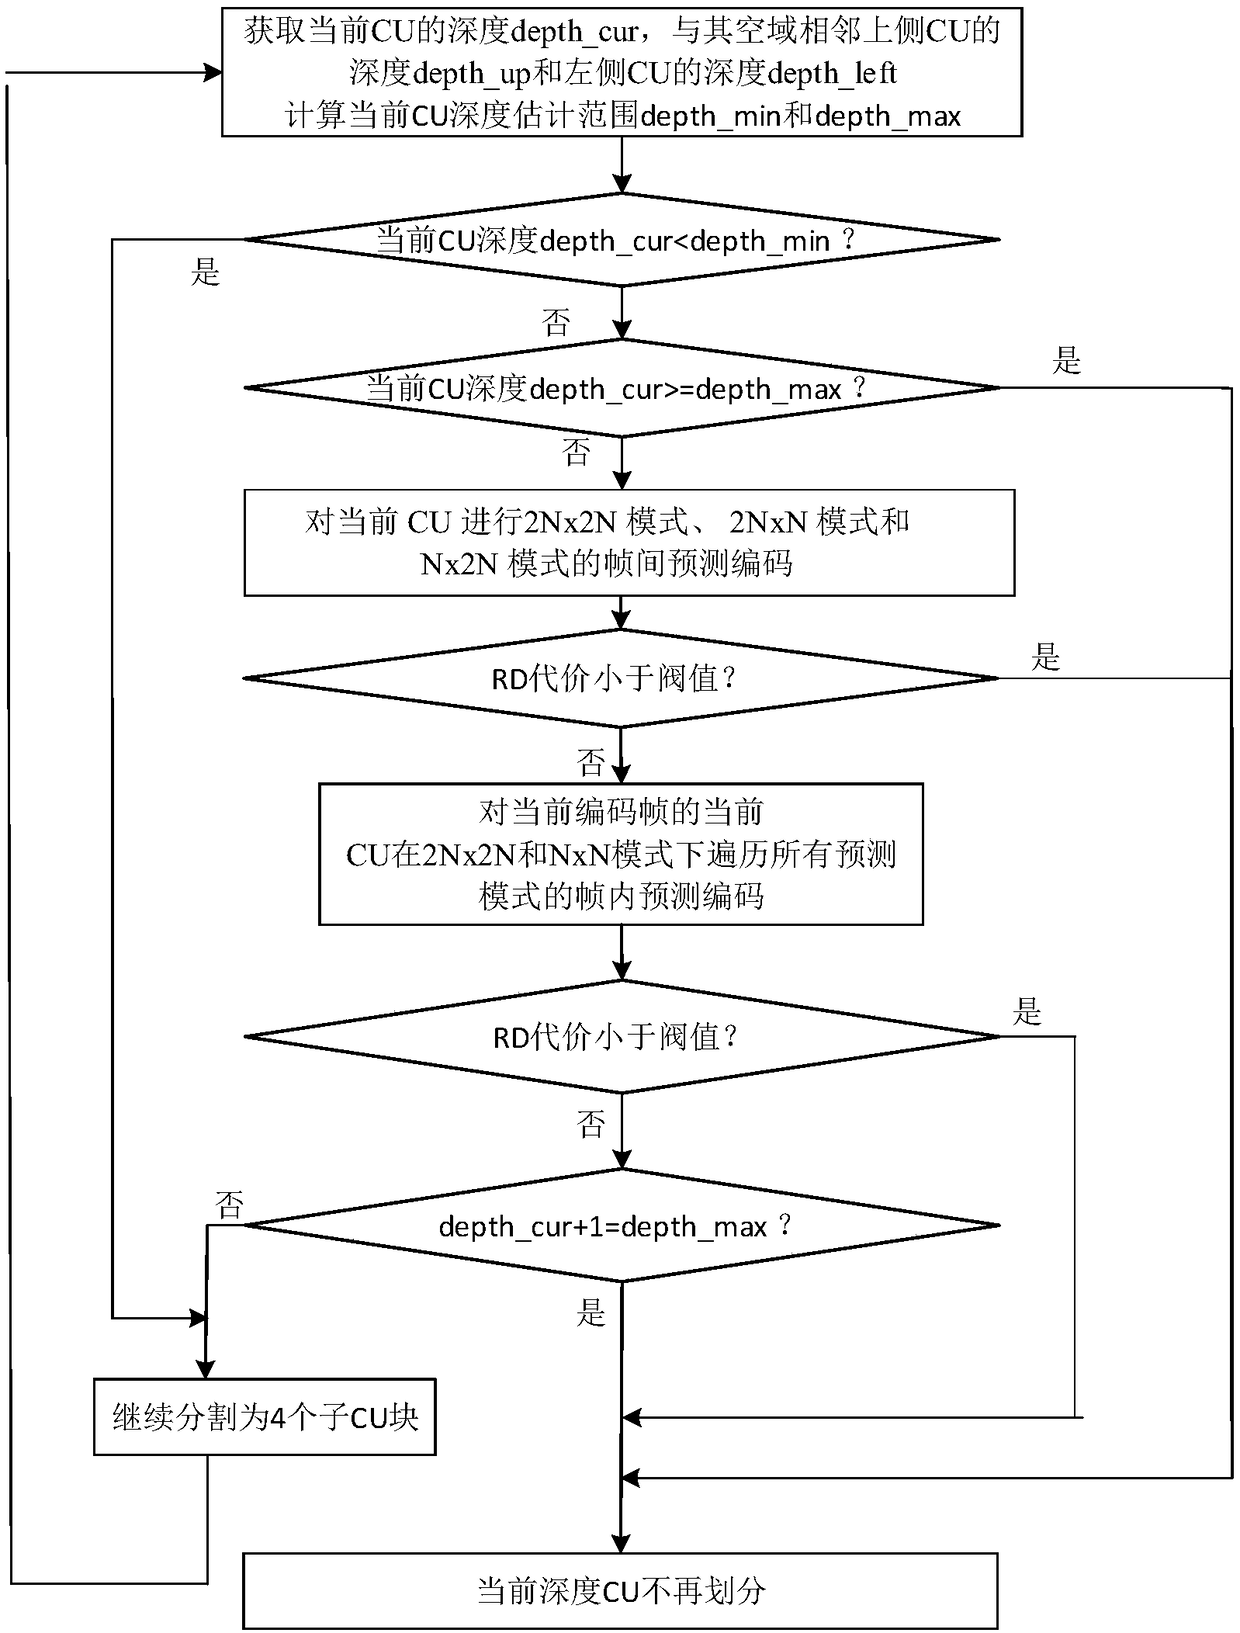 Coding unit (CU) division method applied to high efficiency video coding (HEVC)